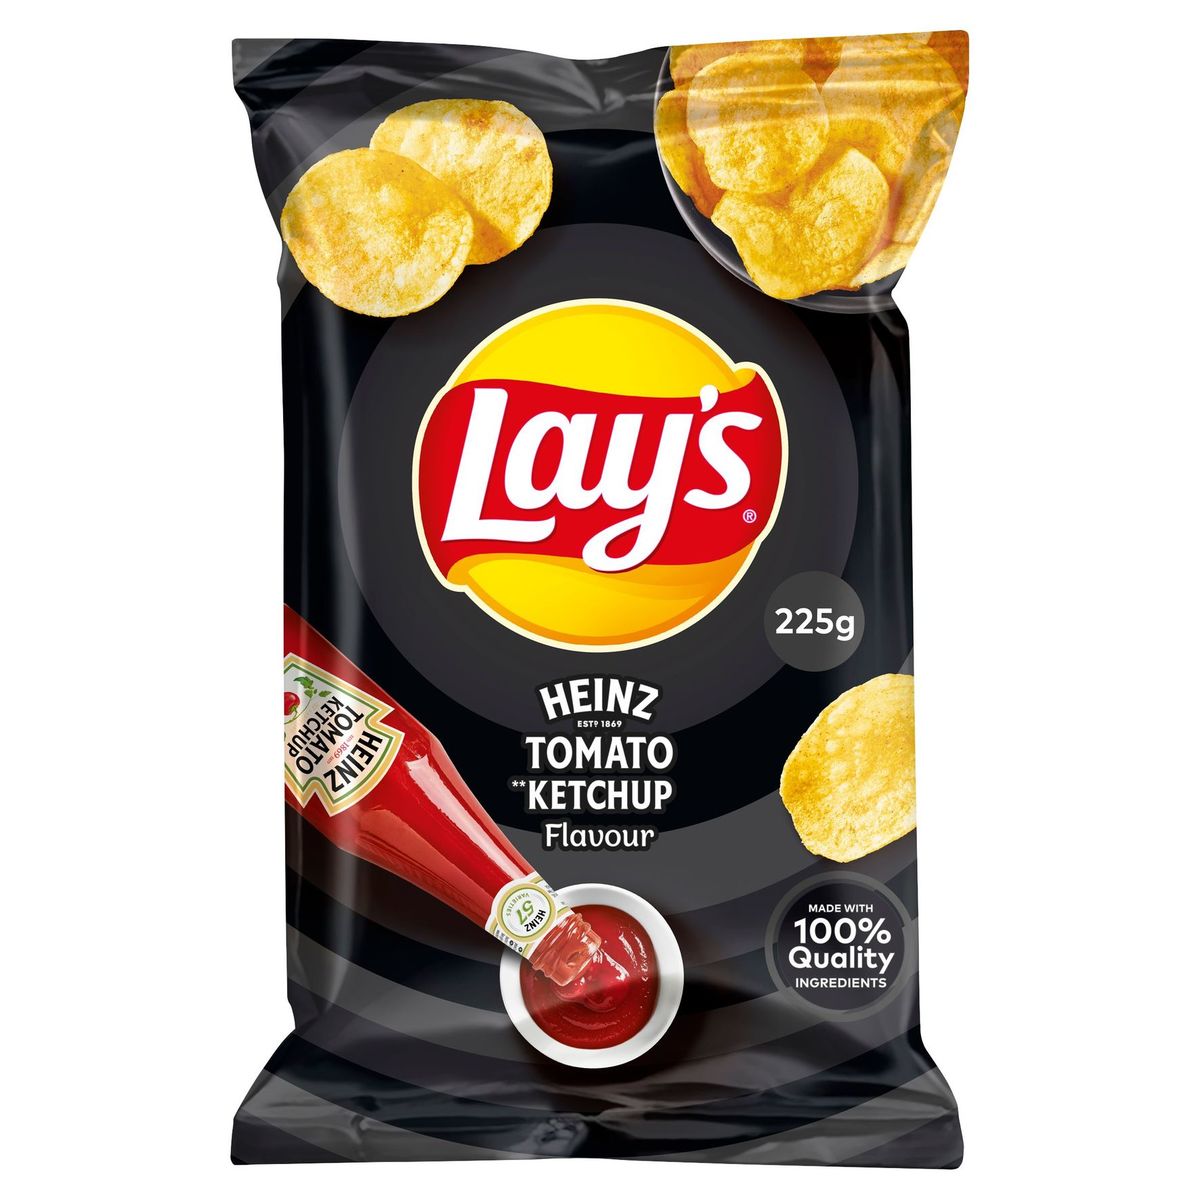 Lay's Aardappelchips Heinz Tomato Ketchup Flavour 225g